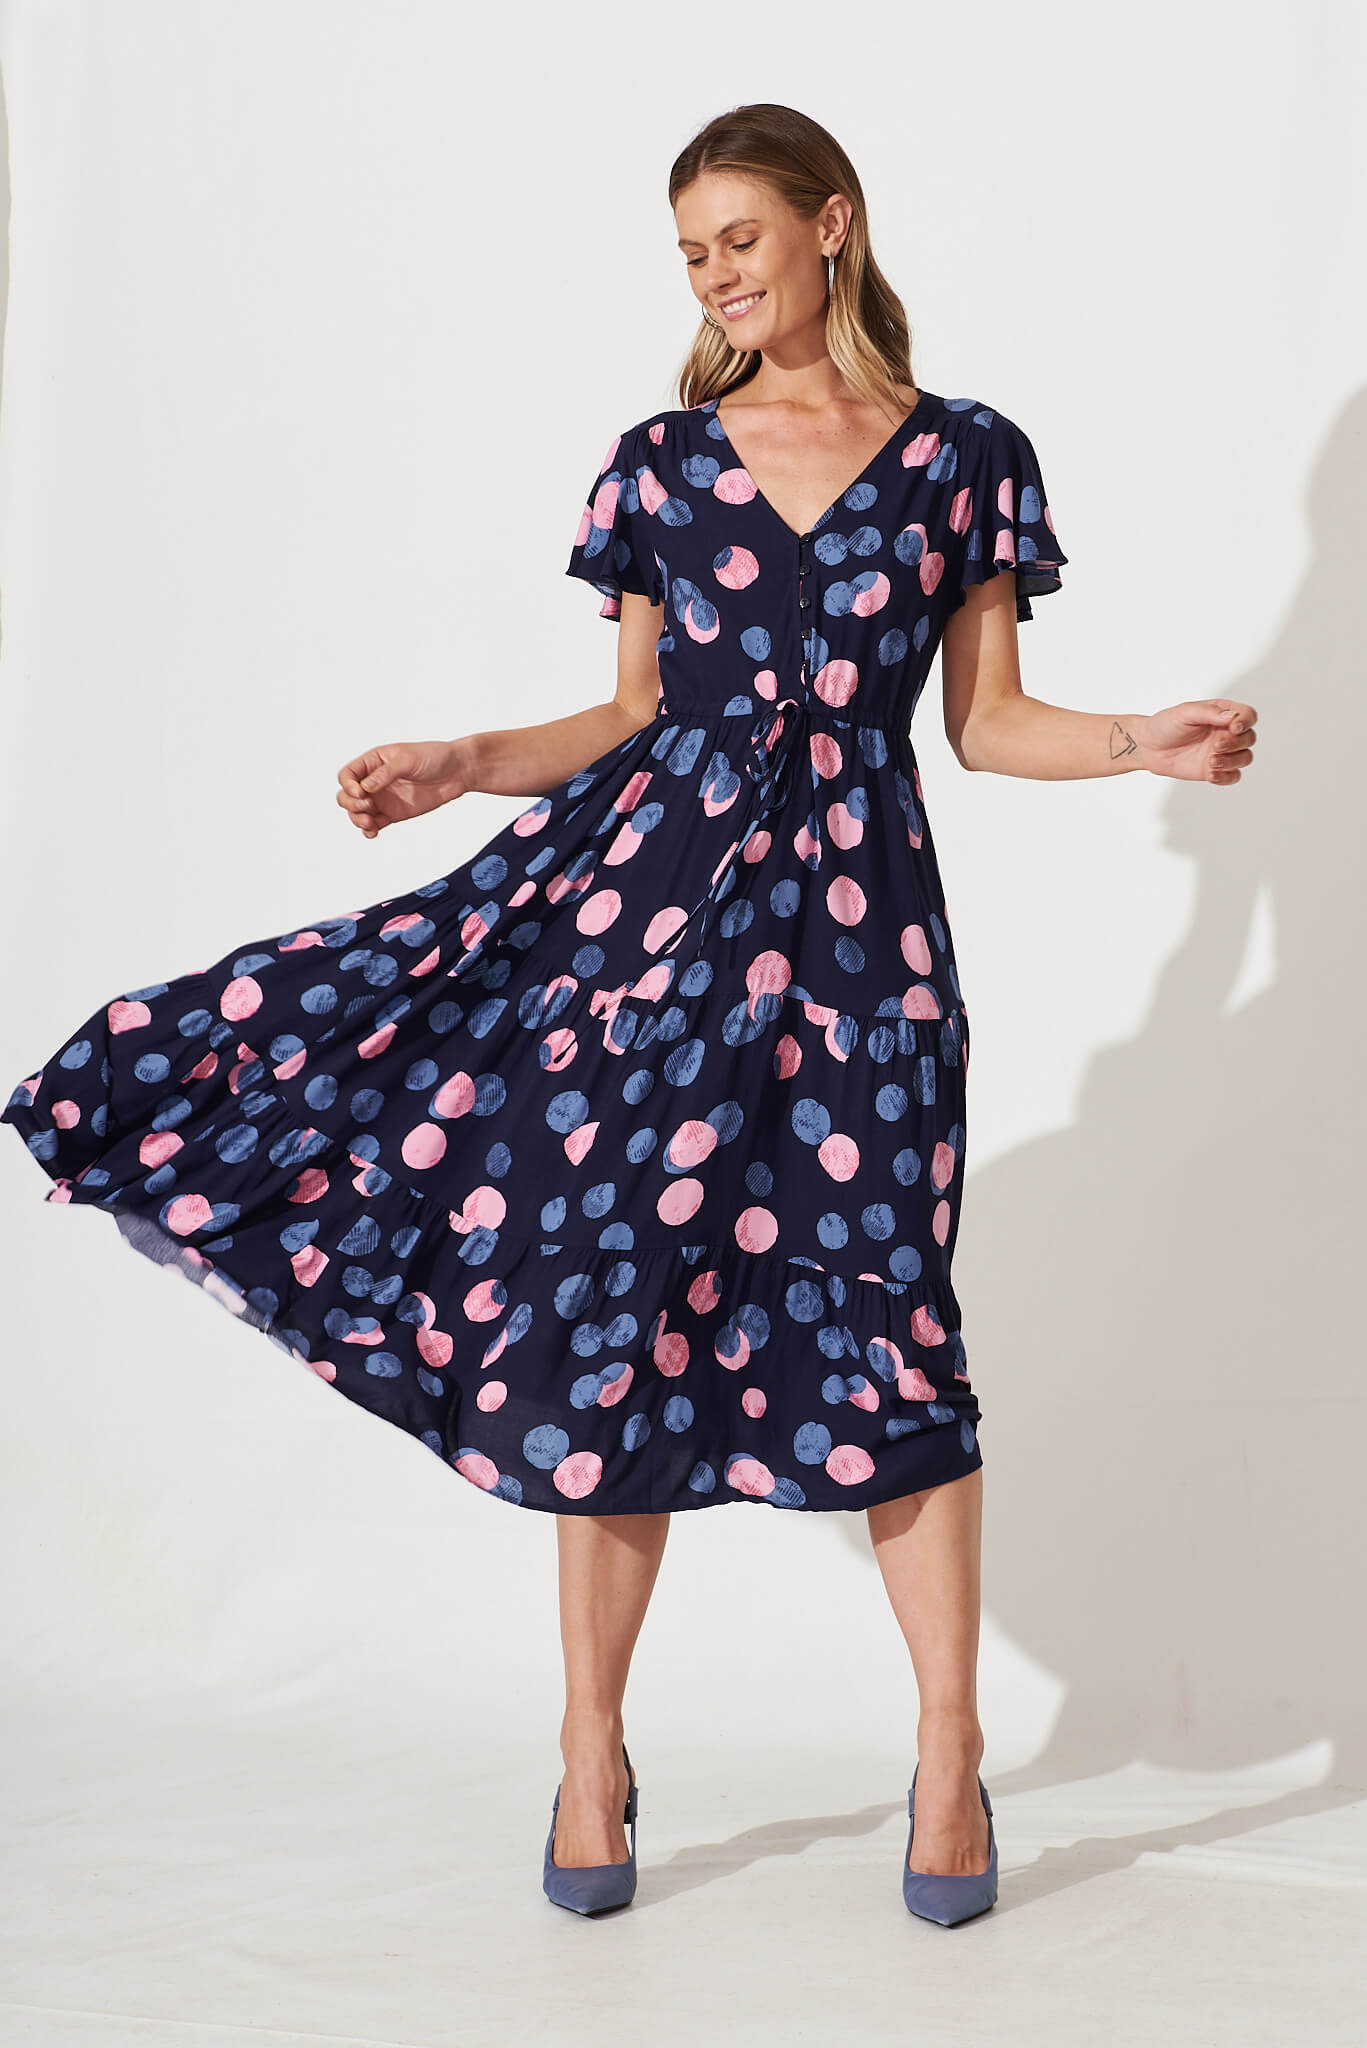 Saturday Maxi Dress In Navy With Pink And Blue Spot - full length